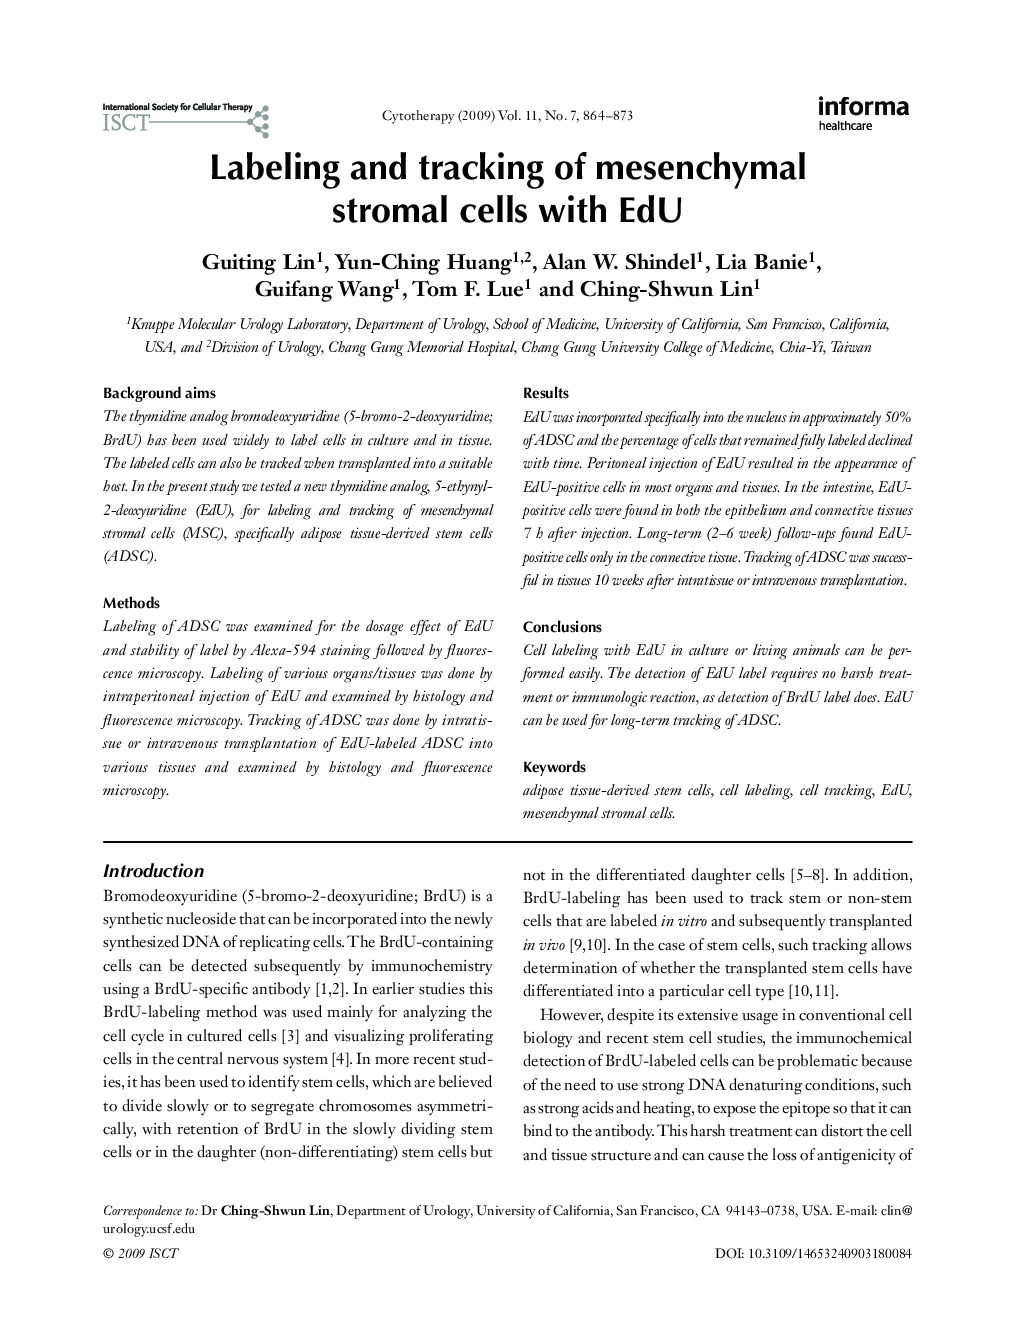 Labeling and tracking of mesenchymal stromal cells with EdU